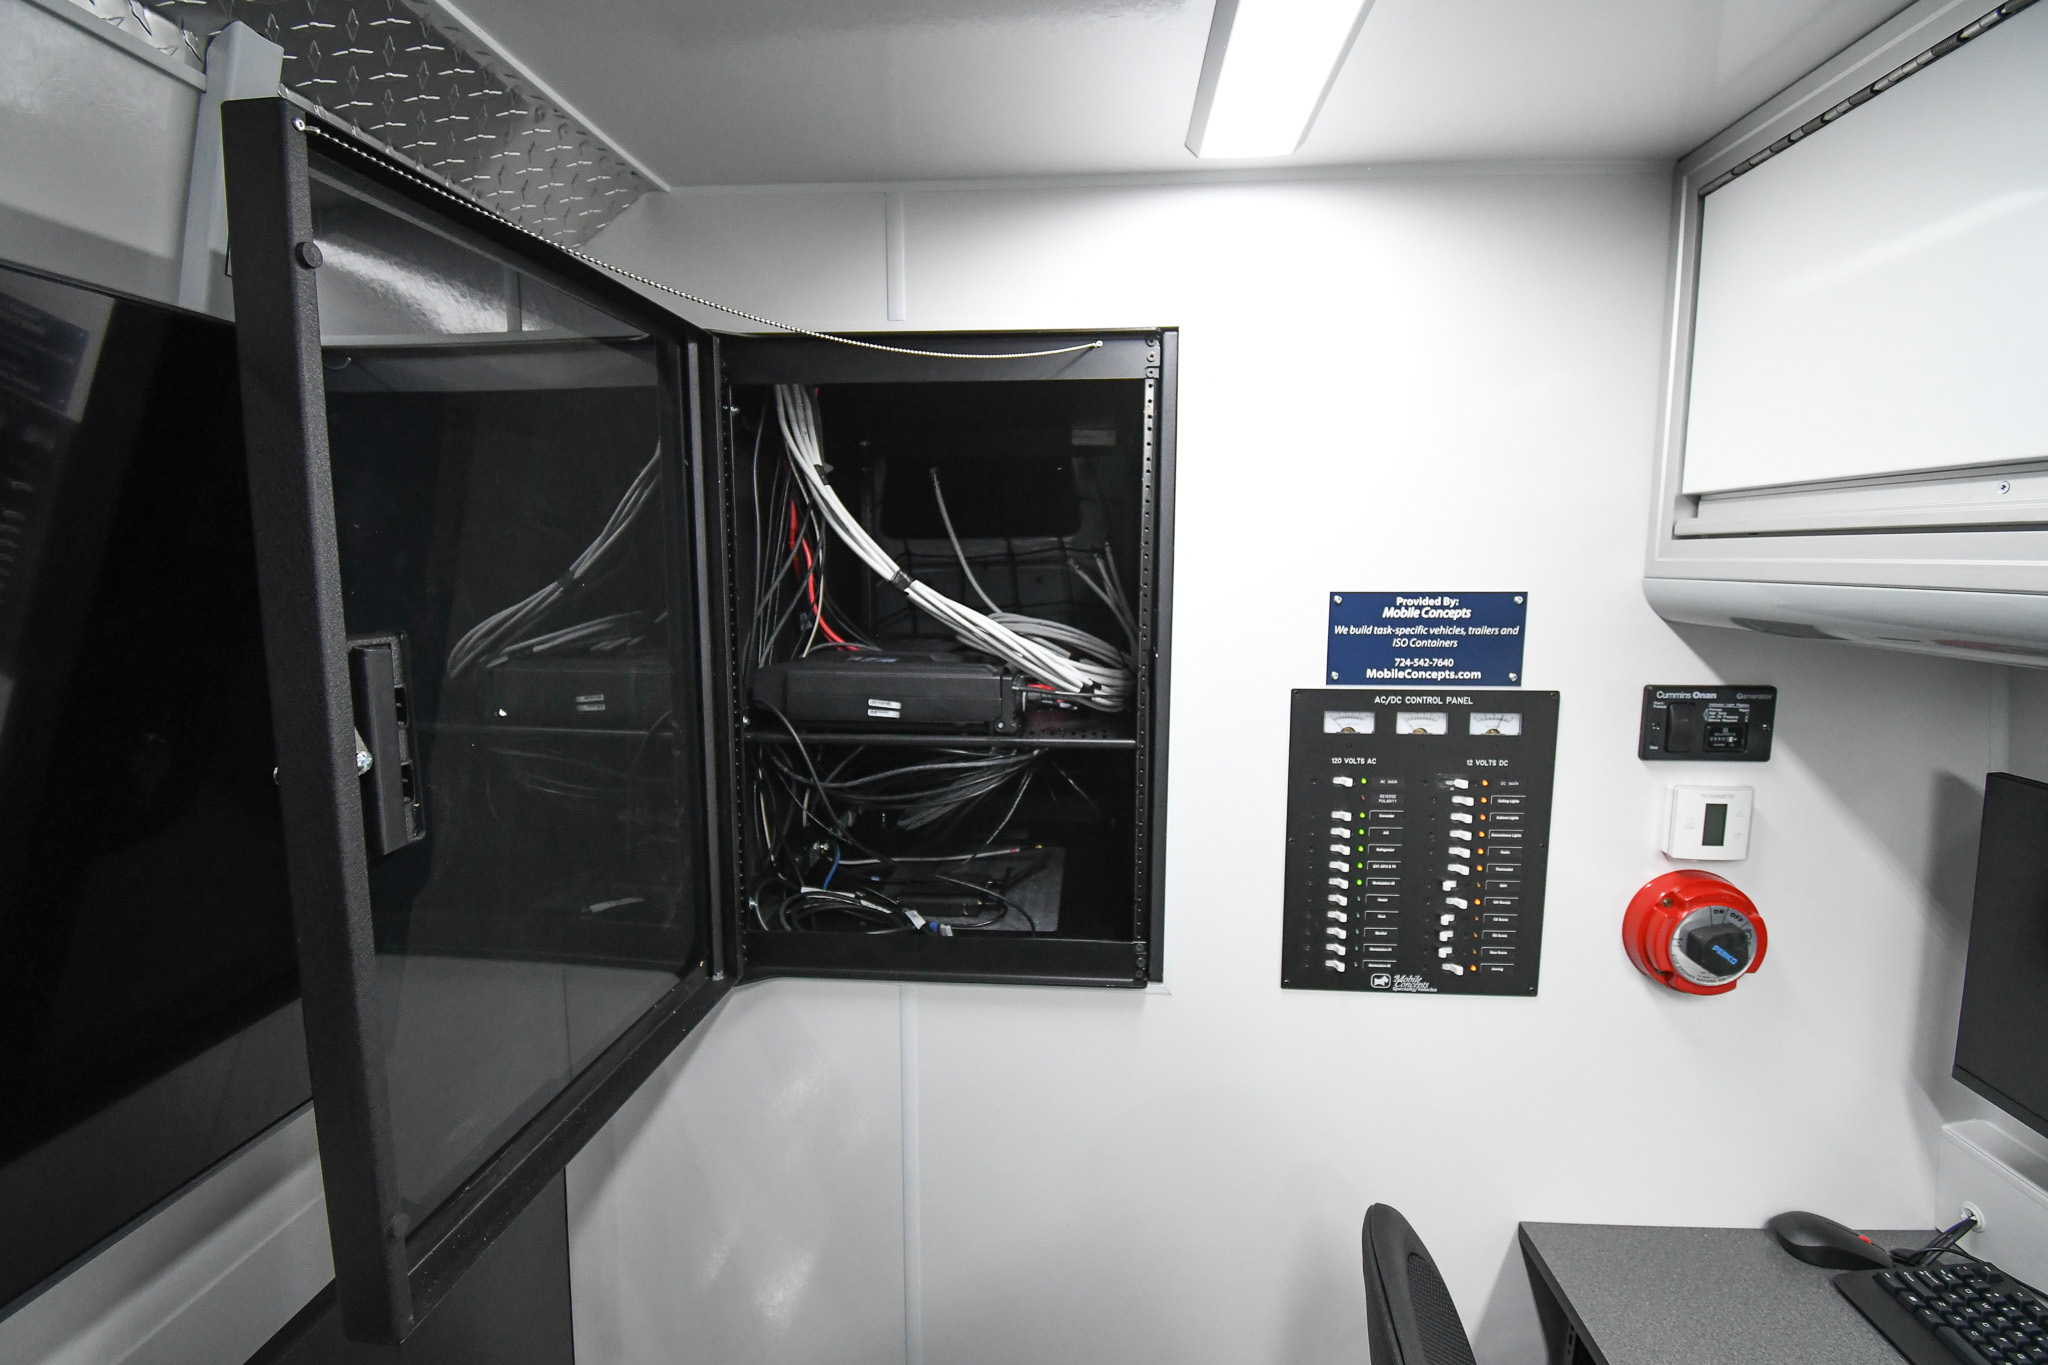 A view of the electronics rack inside the wall-mounted cabinet in the unit made for the San Joaquin County Sheriff's Office.